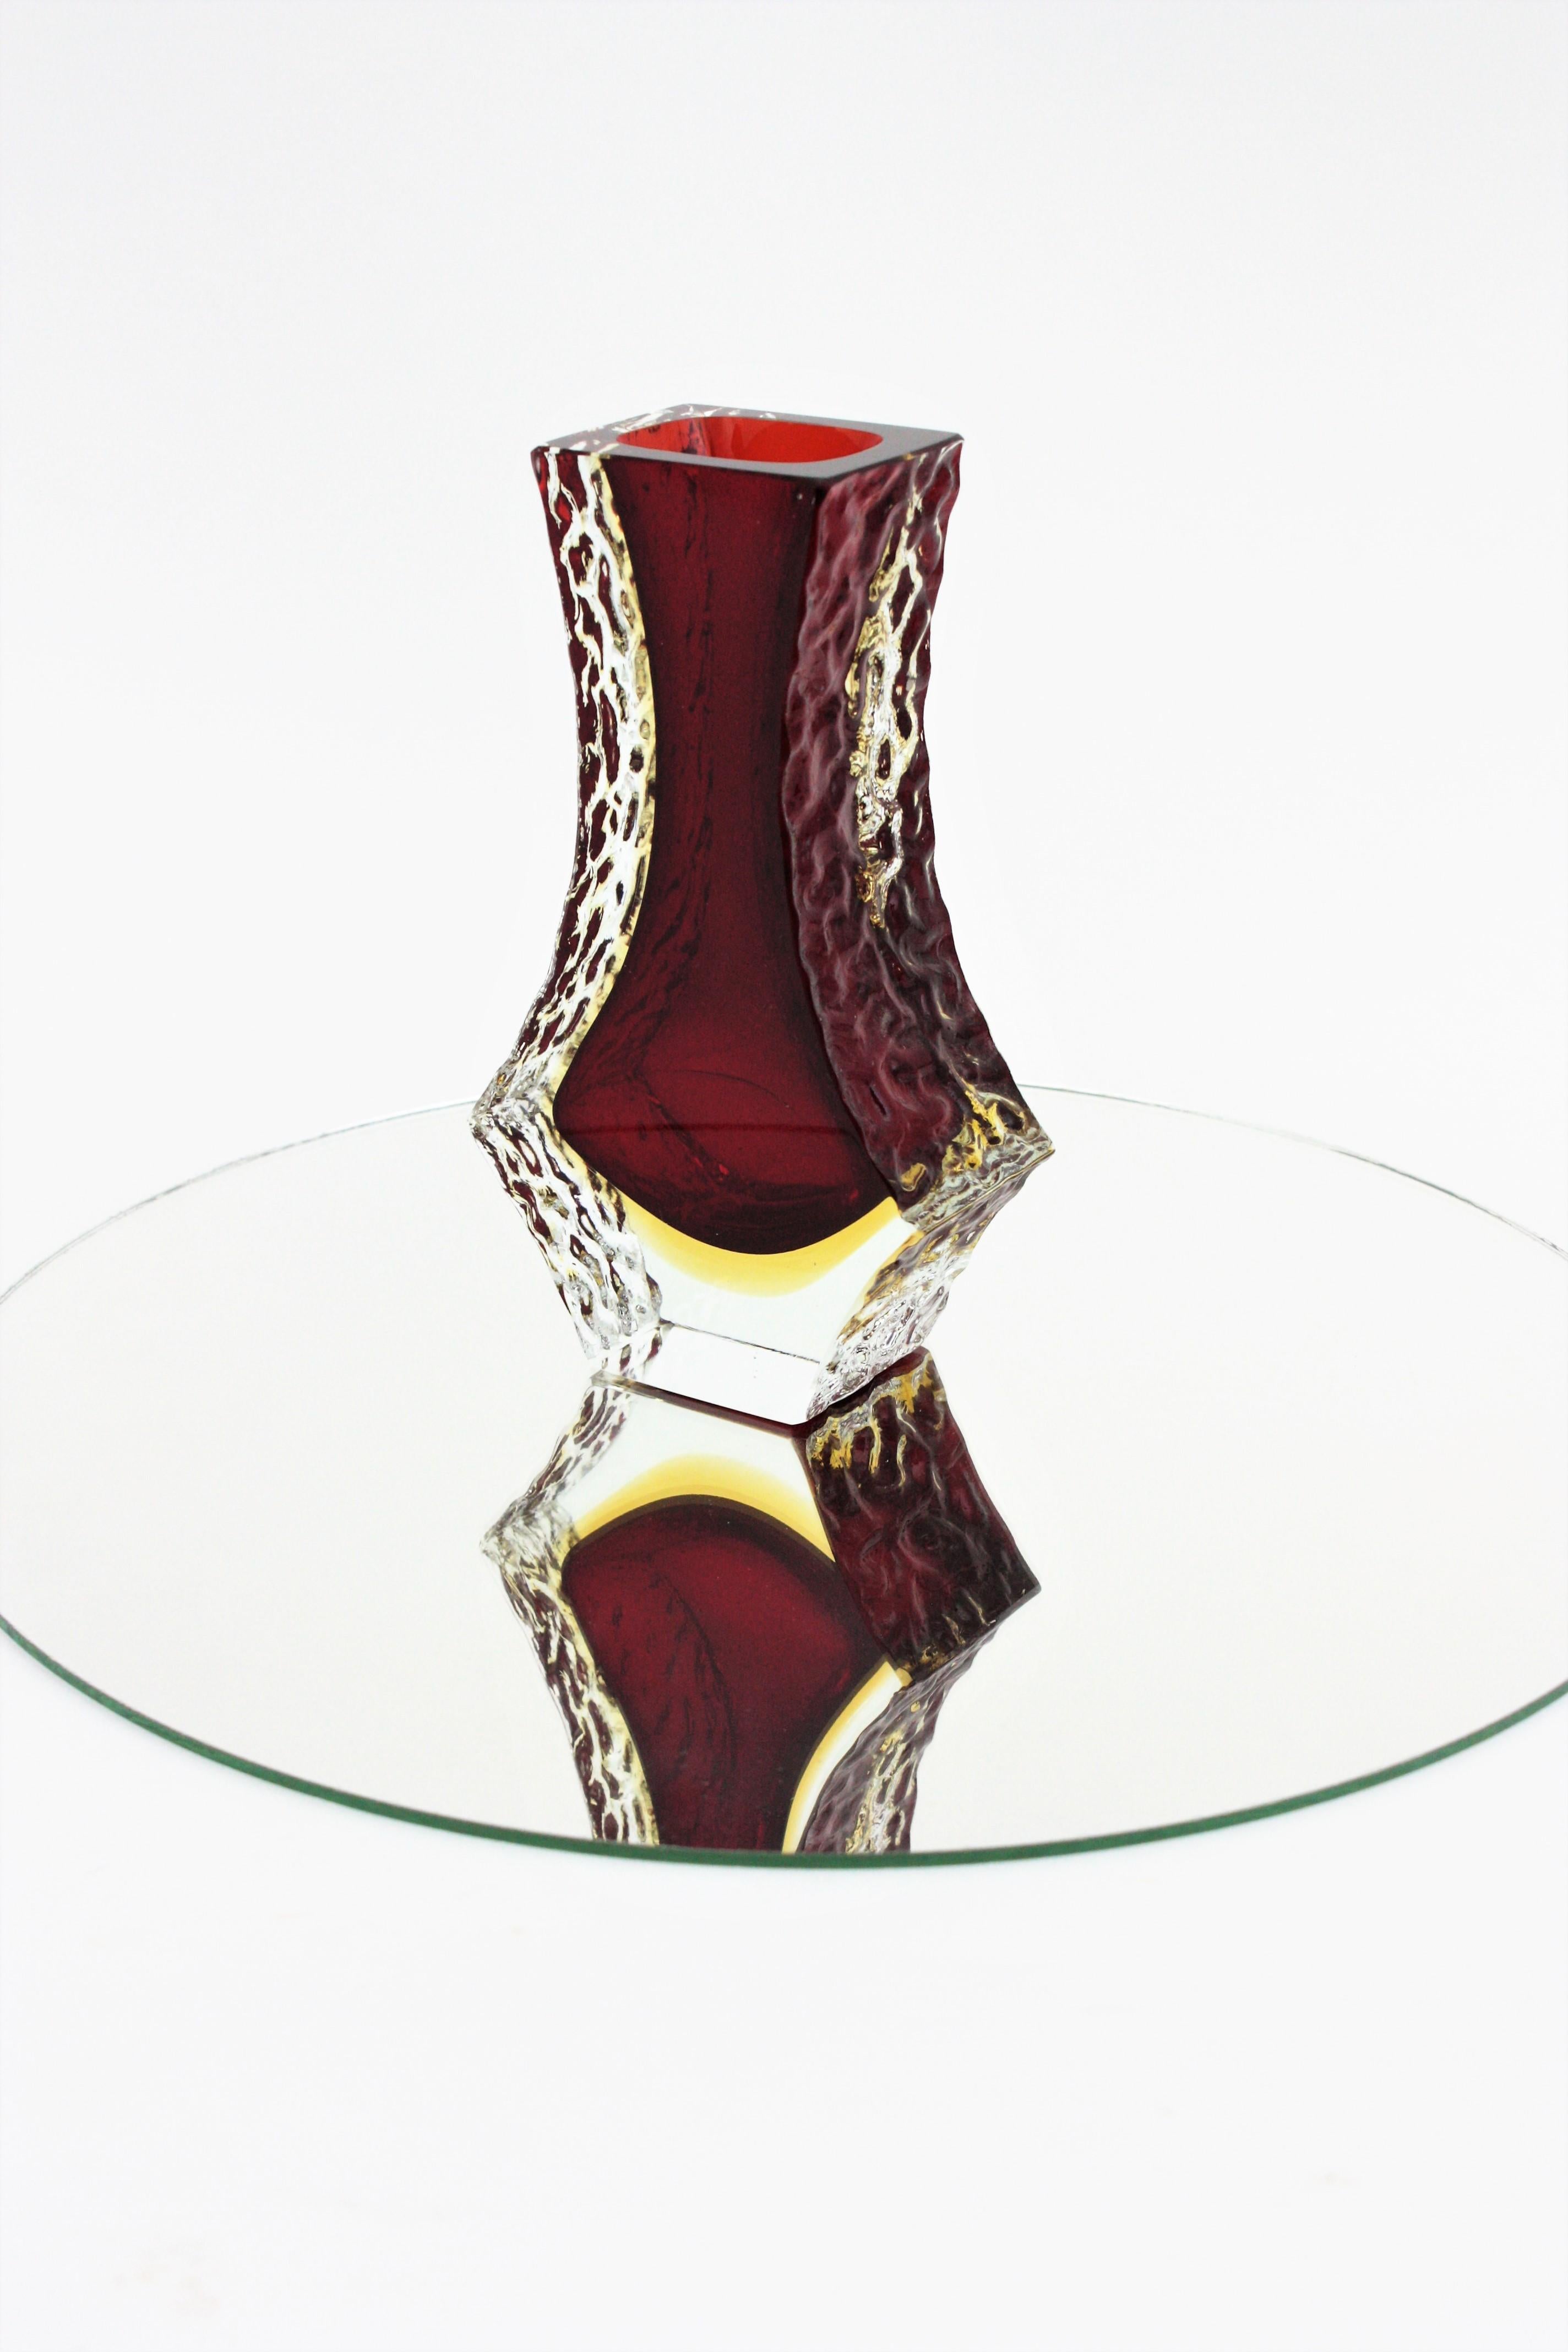 Mandruzzato Murano Sommerso Red Yellow Ice Glass Faceted Vase  For Sale 6